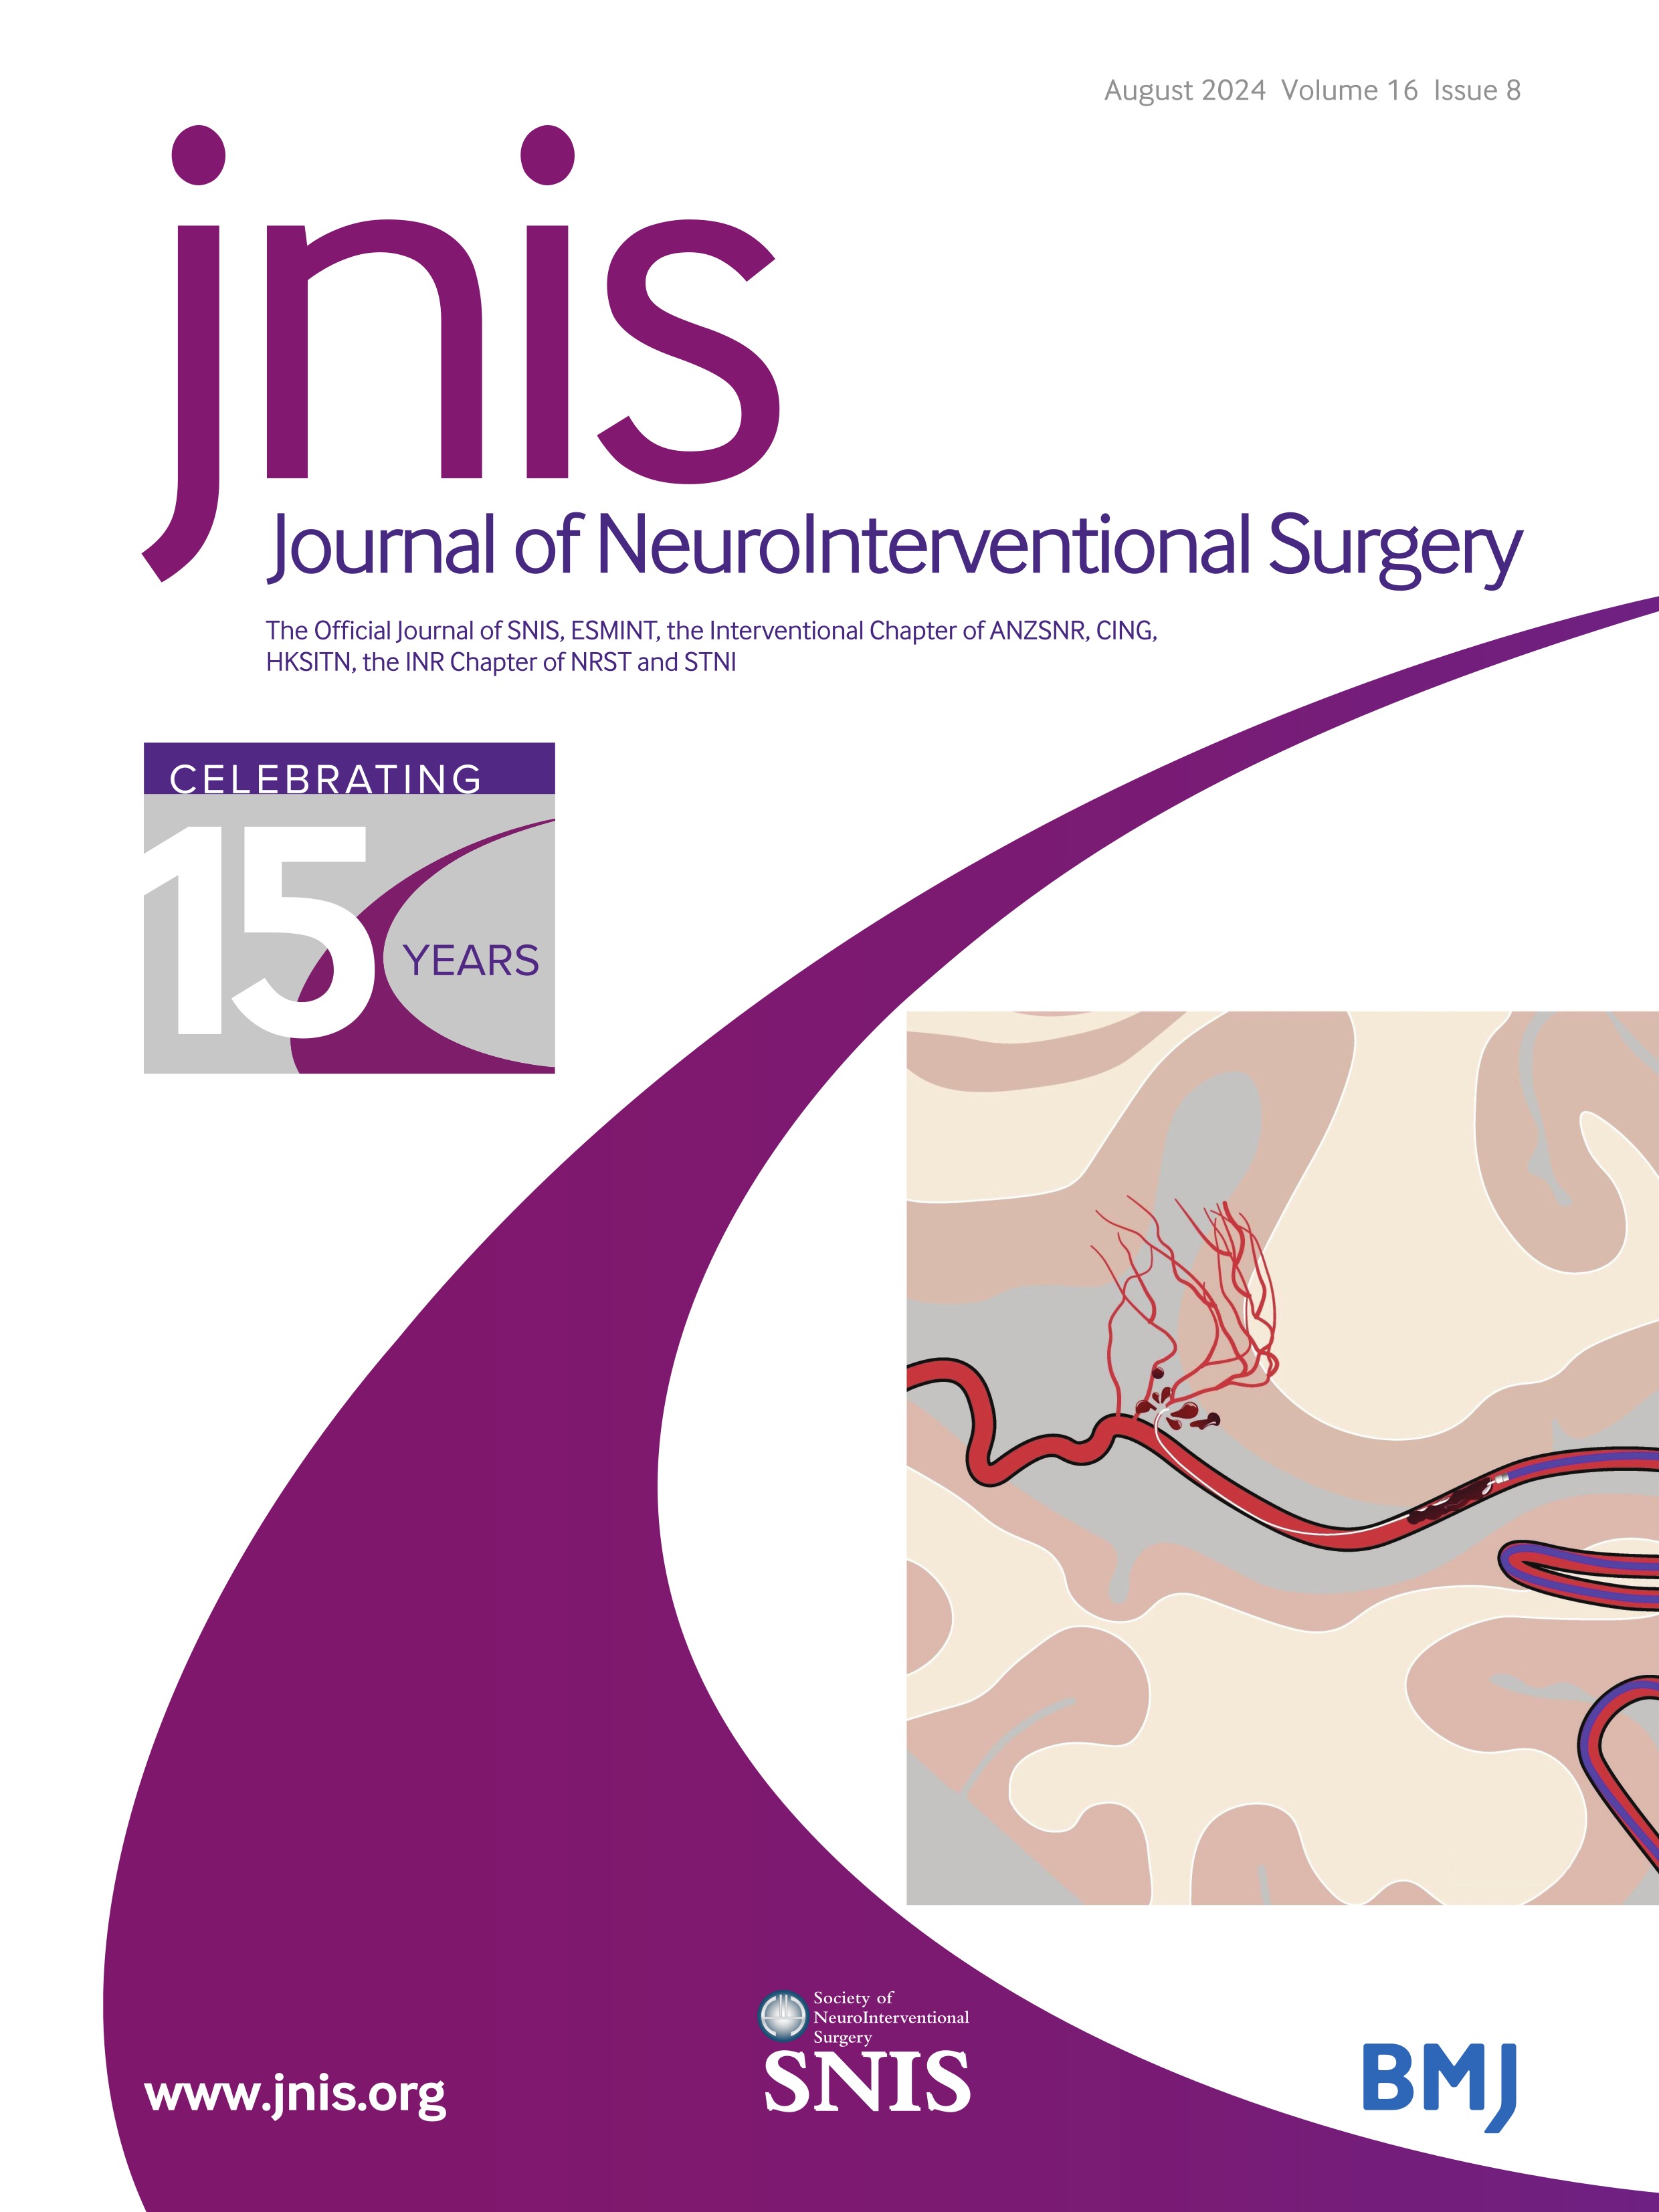 In vitro and in silico assessment of flow modulation after deploying the Contour Neurovascular System in intracranial aneurysm models